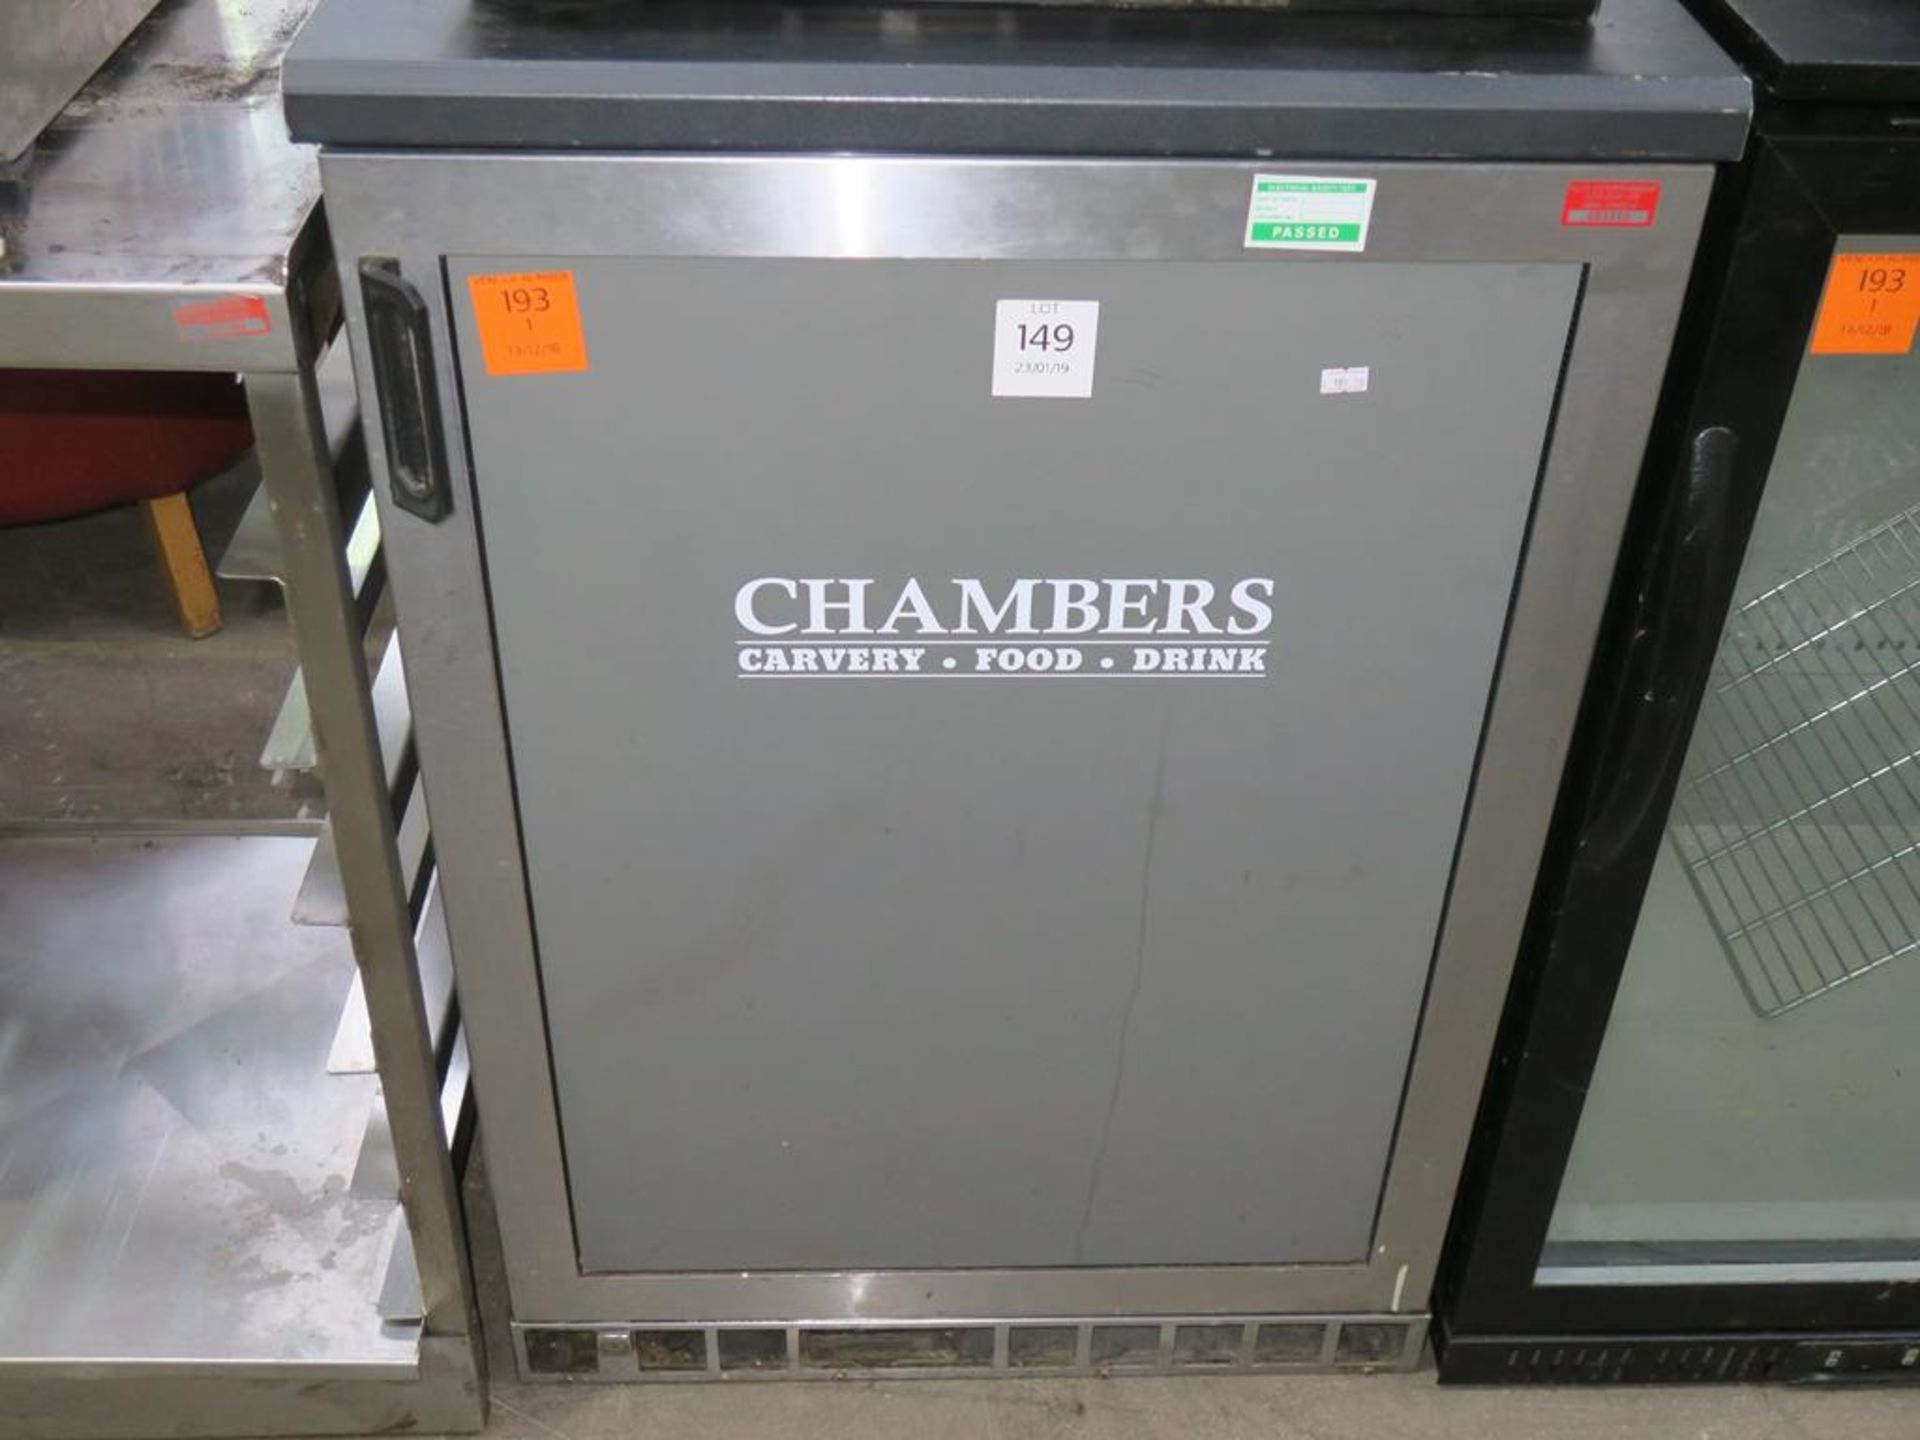 Gamko Glass Fronted Display Chiller